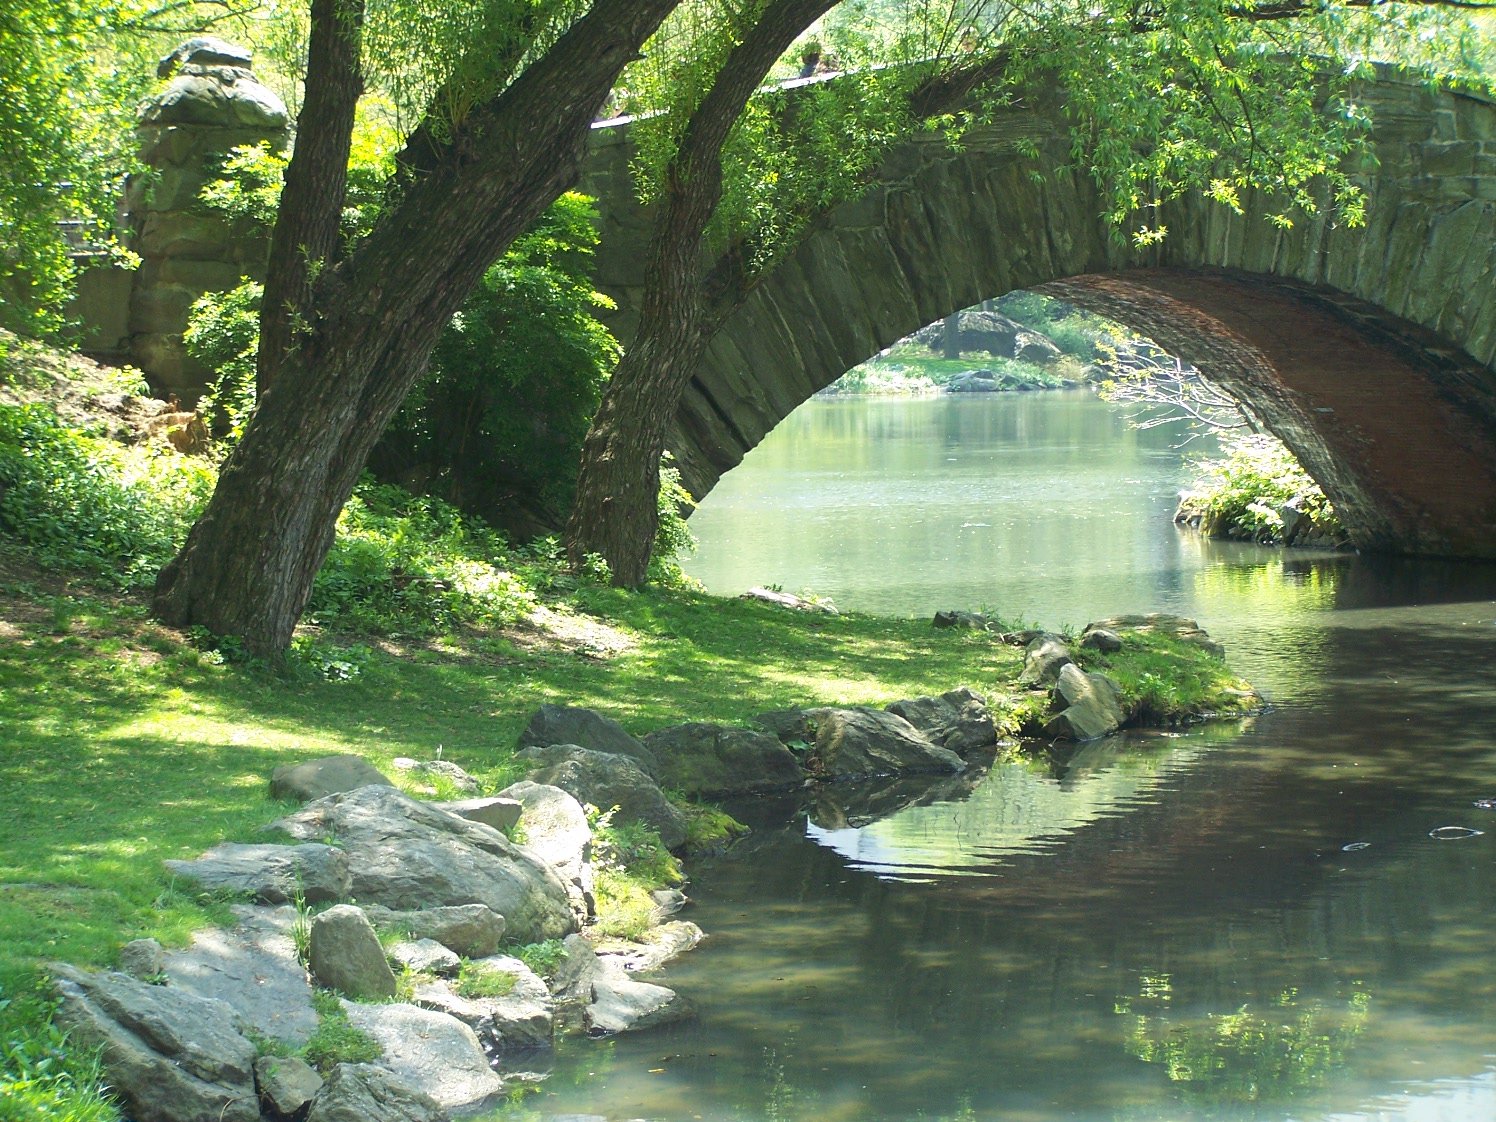 a bridge is seen above a body of water